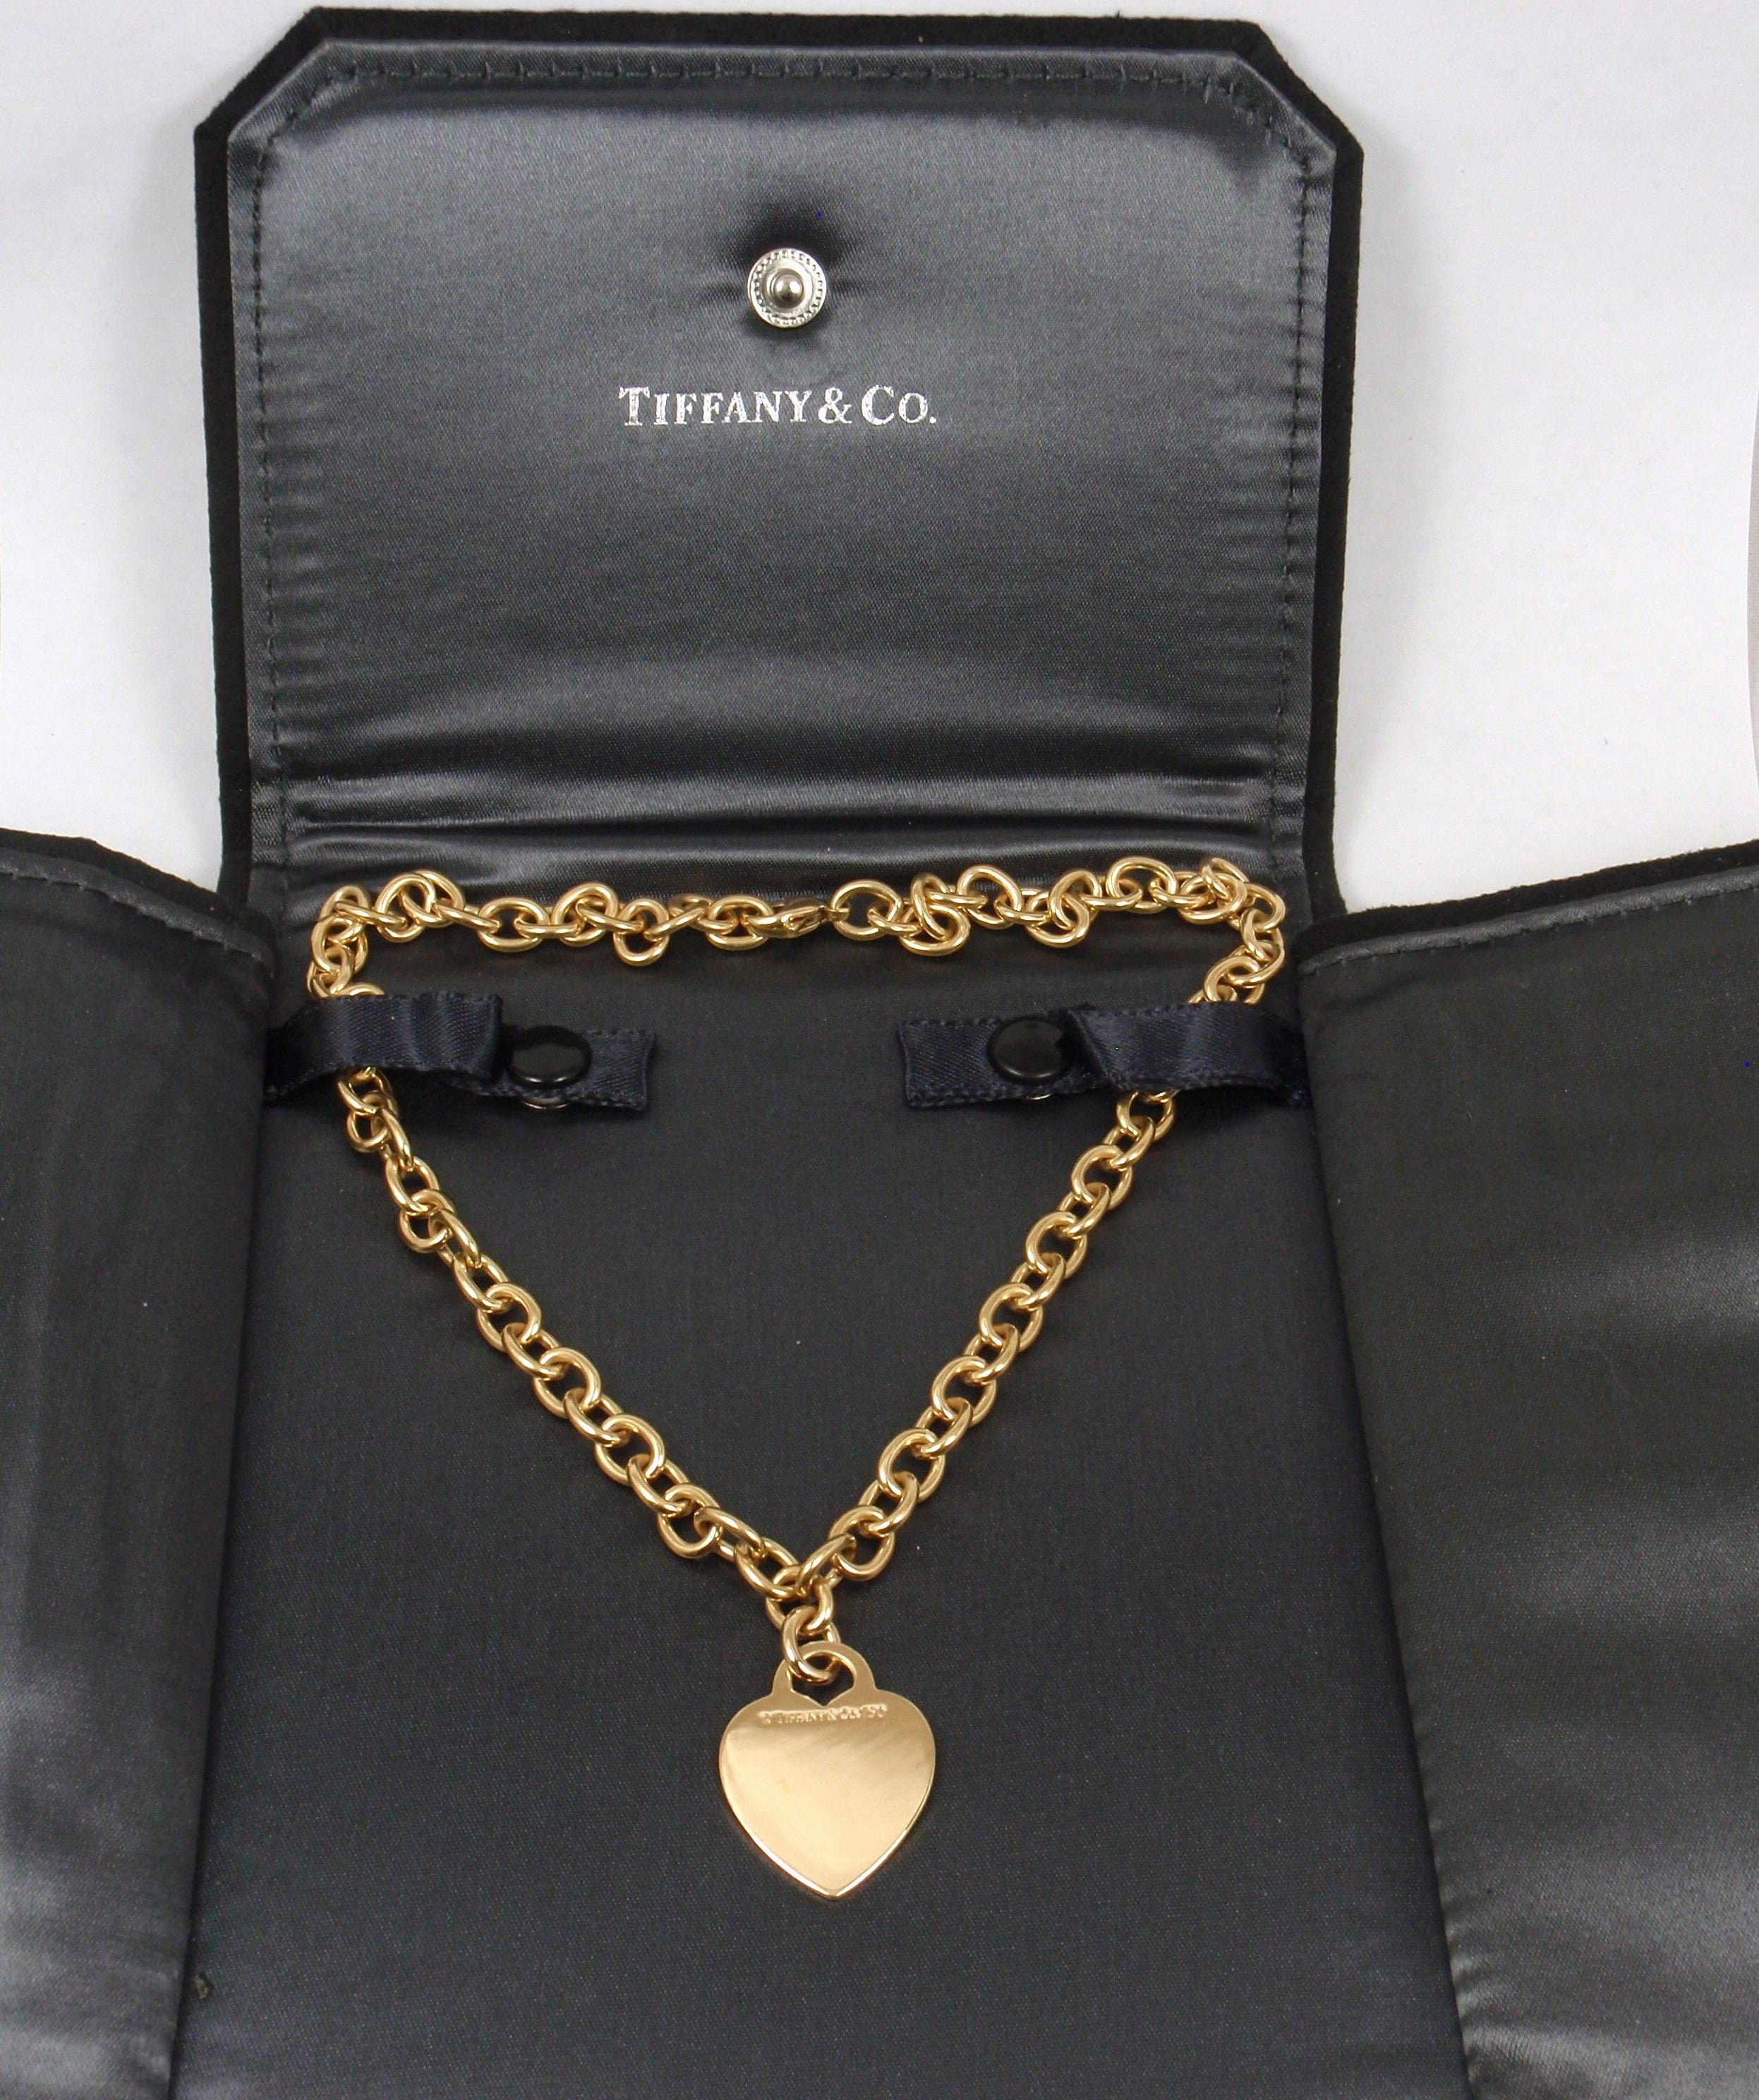 TIFFANY&Co. Makers Chain 61cm Necklace Choker Silver 925 x K18 Gold Ap